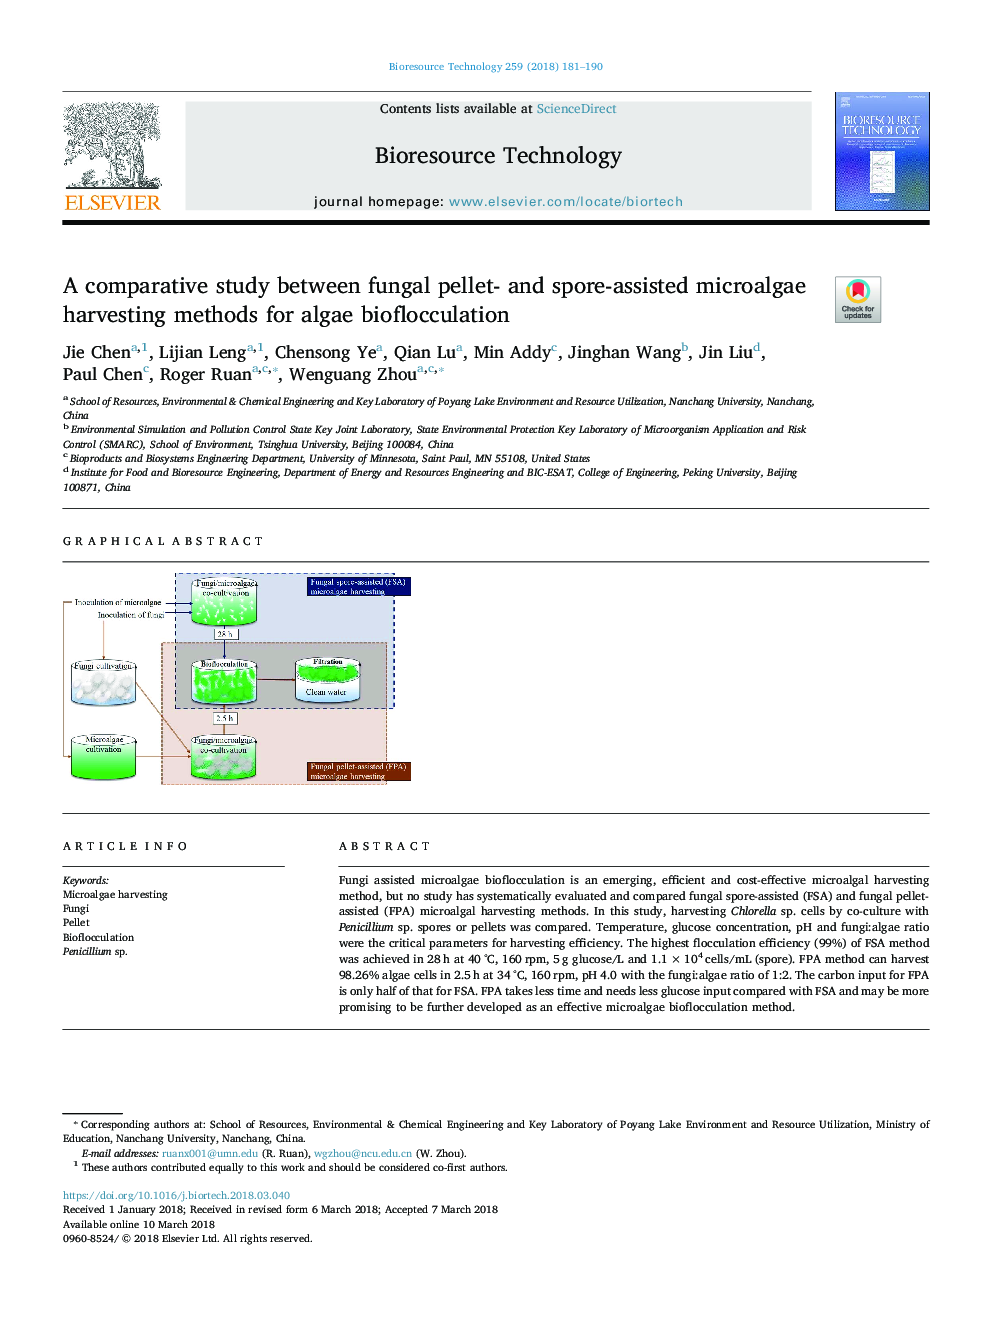 A comparative study between fungal pellet- and spore-assisted microalgae harvesting methods for algae bioflocculation